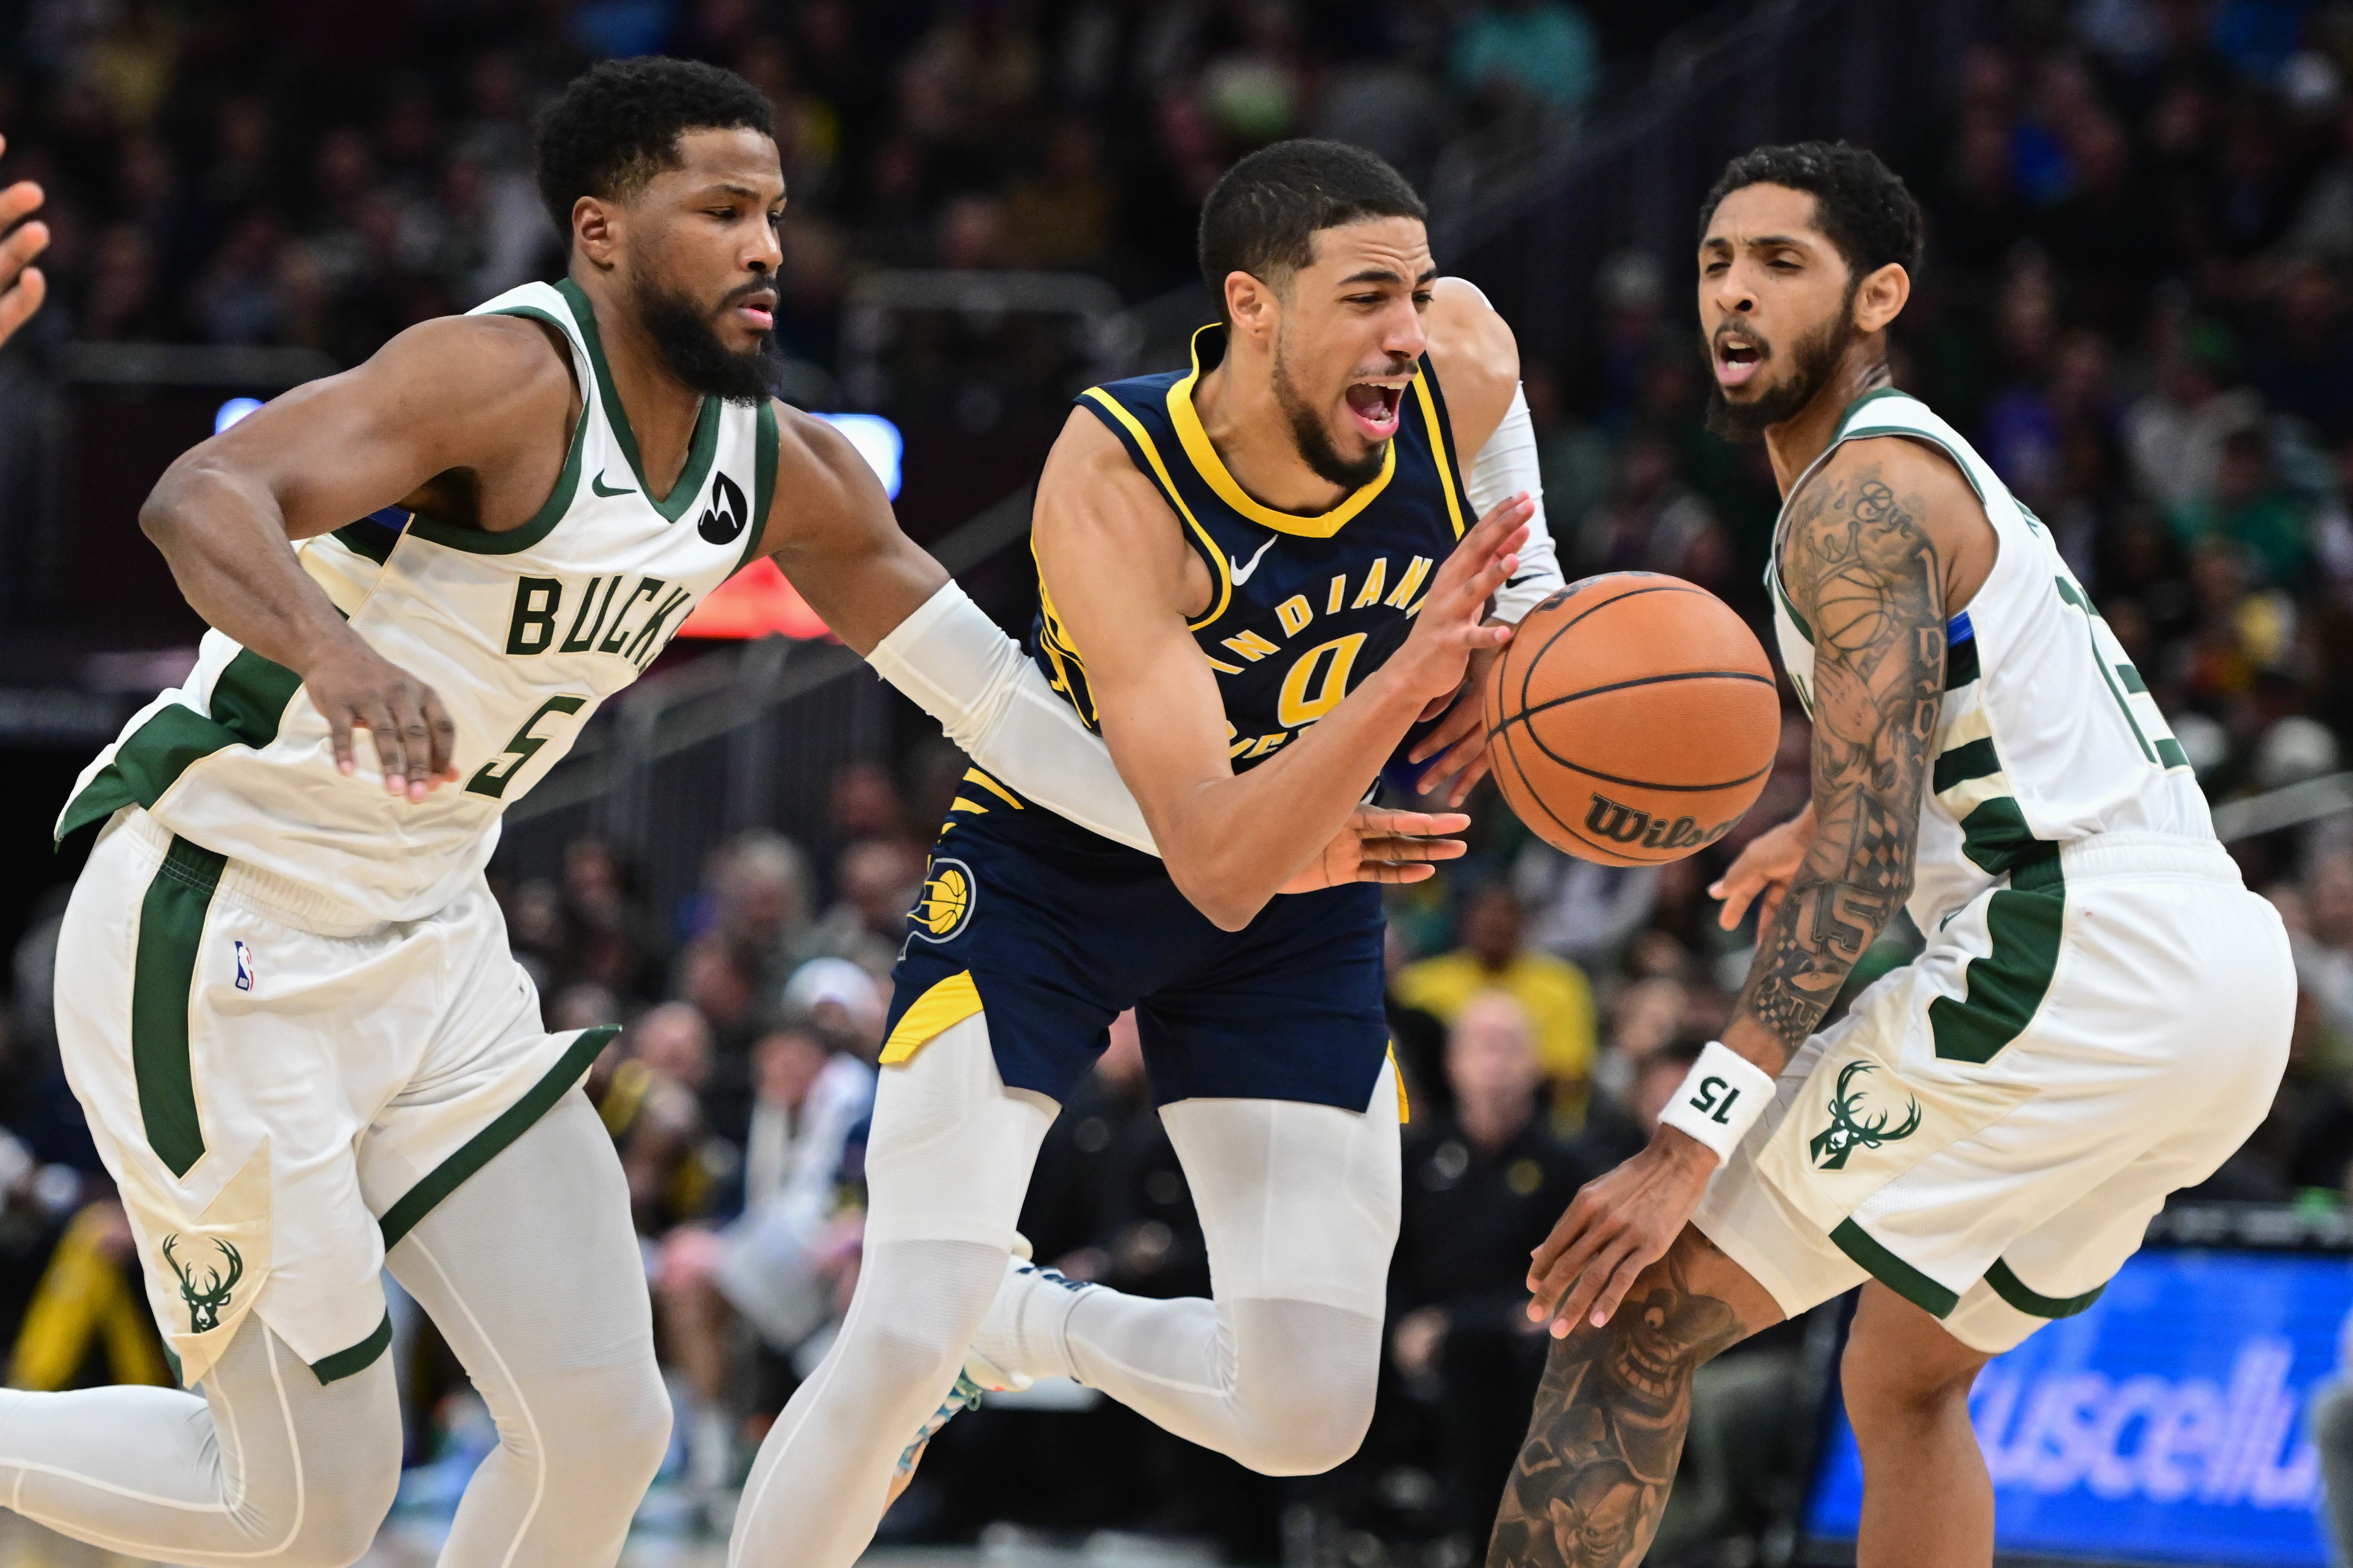 Giannis Antetokounmpo drops career-high 64 points as post-game scuffle mars Milwaukee  Bucks victory over the Indiana Pacers